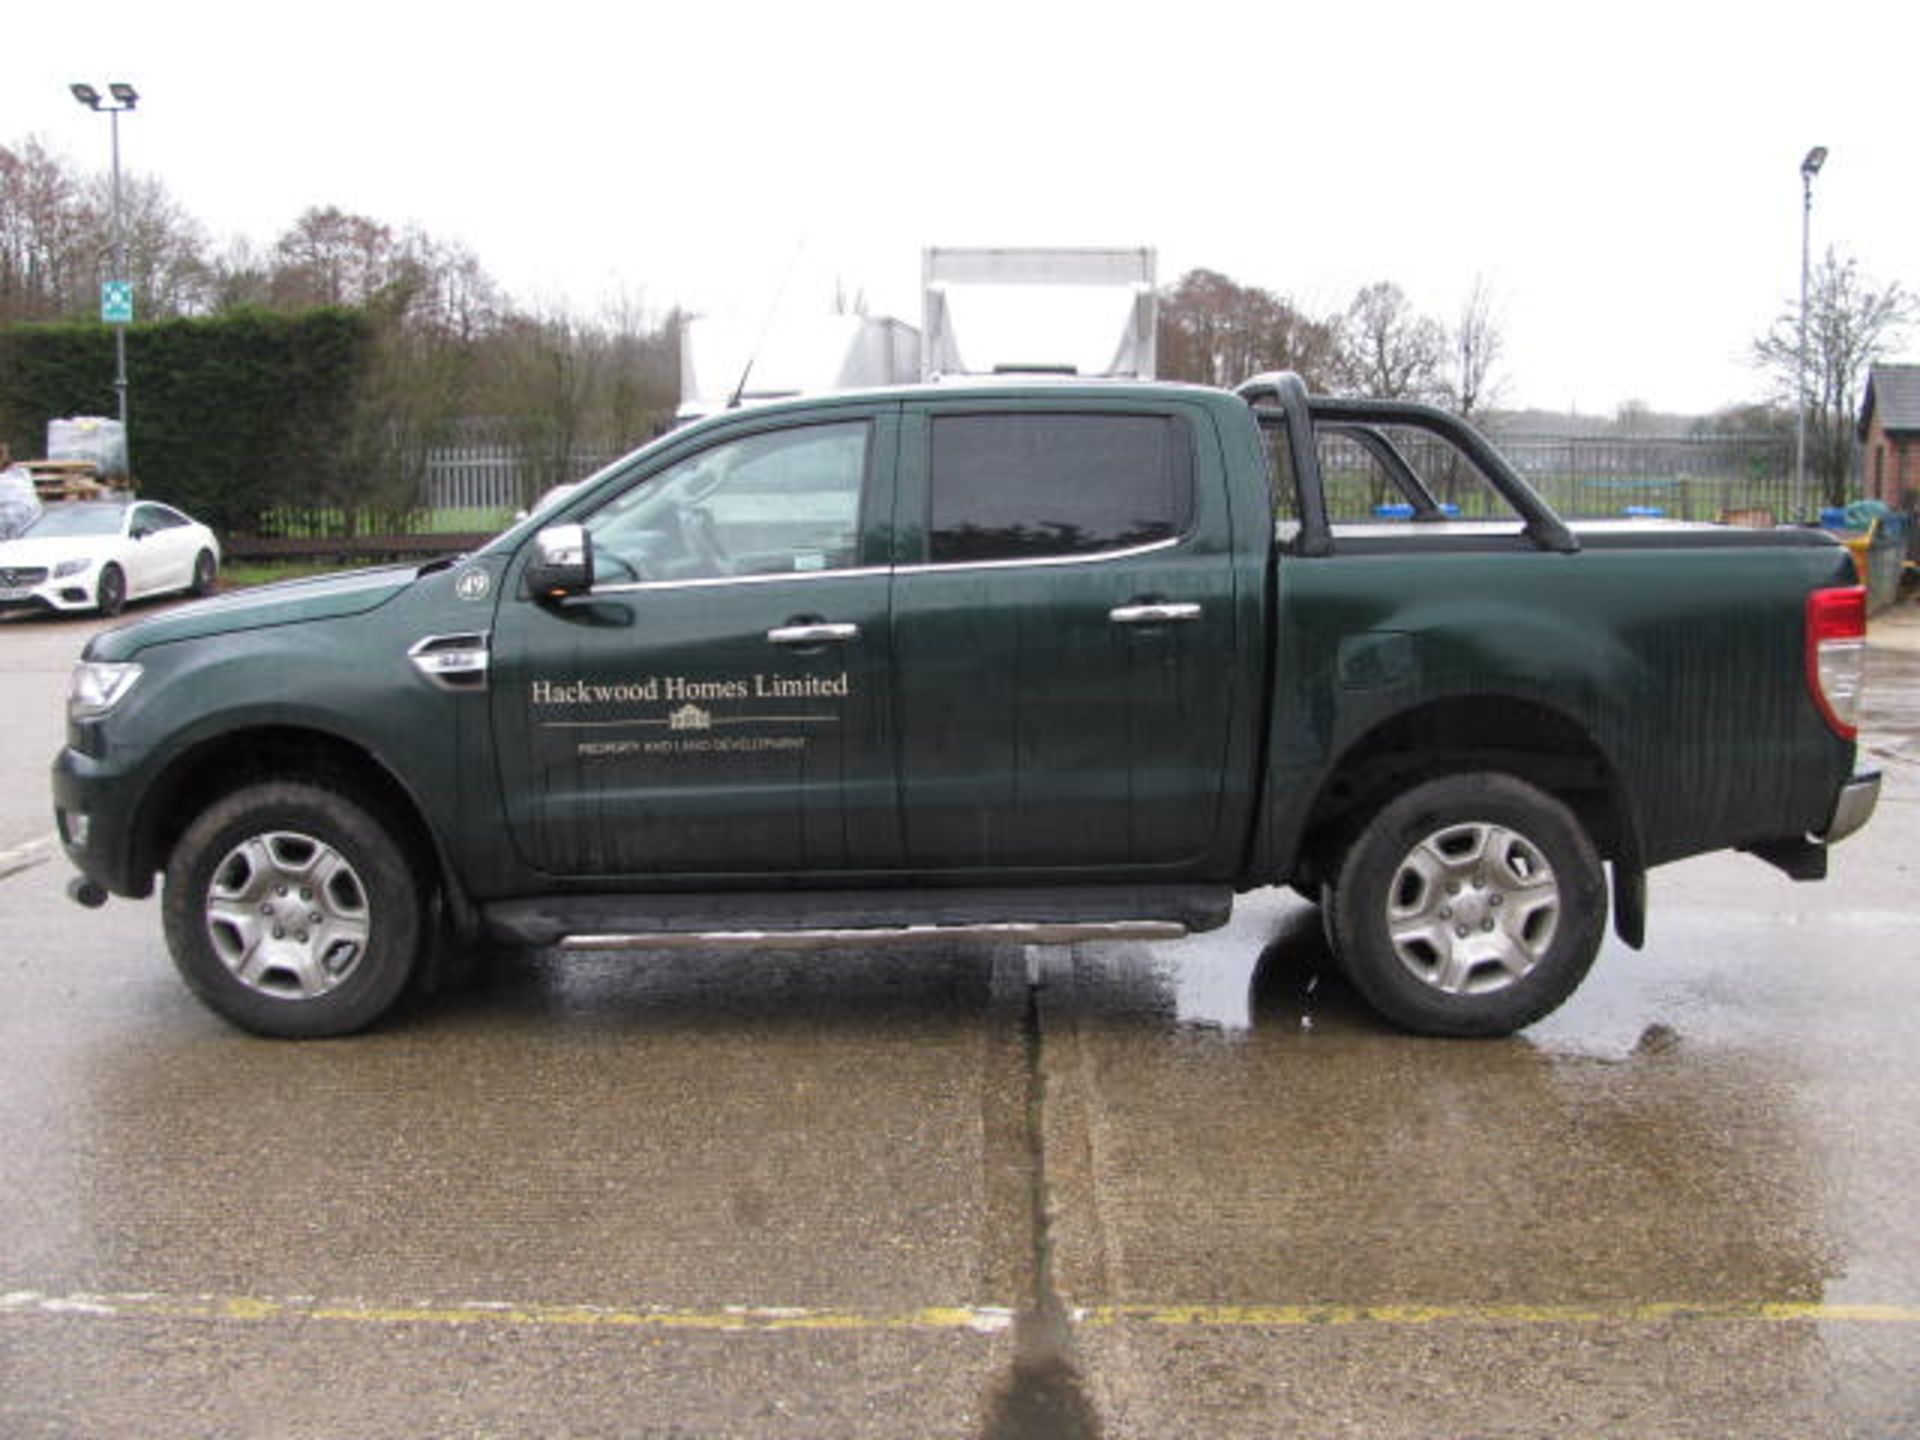 Ford Ranger Ltd 4x4 Double Cab 2.2D Pick Up, Registration No. RX16 GZW - Image 7 of 17